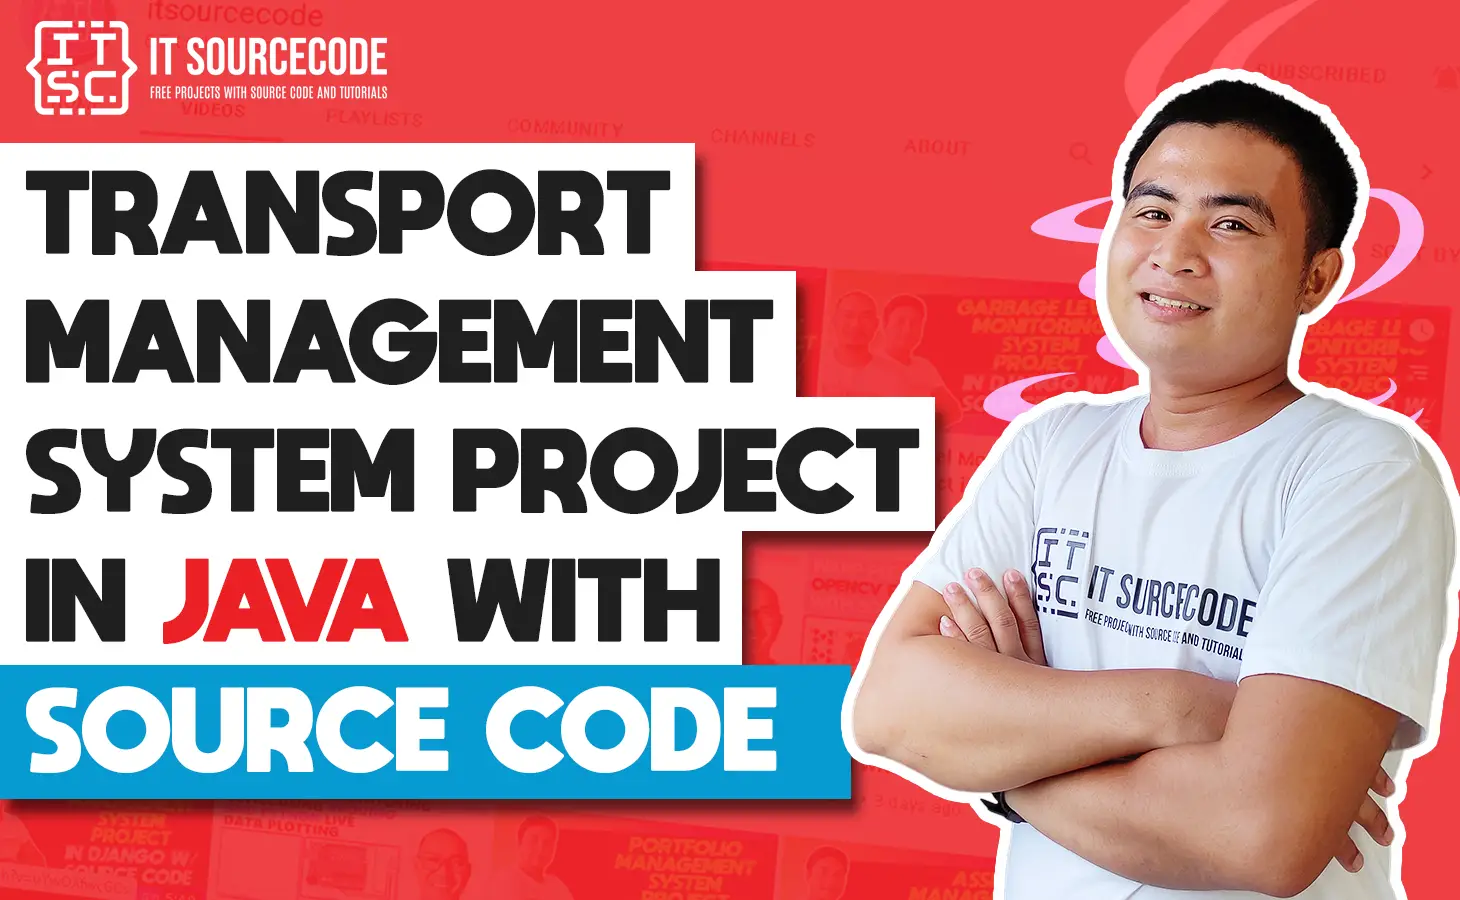 Transport Management System Project In Java With Source Code